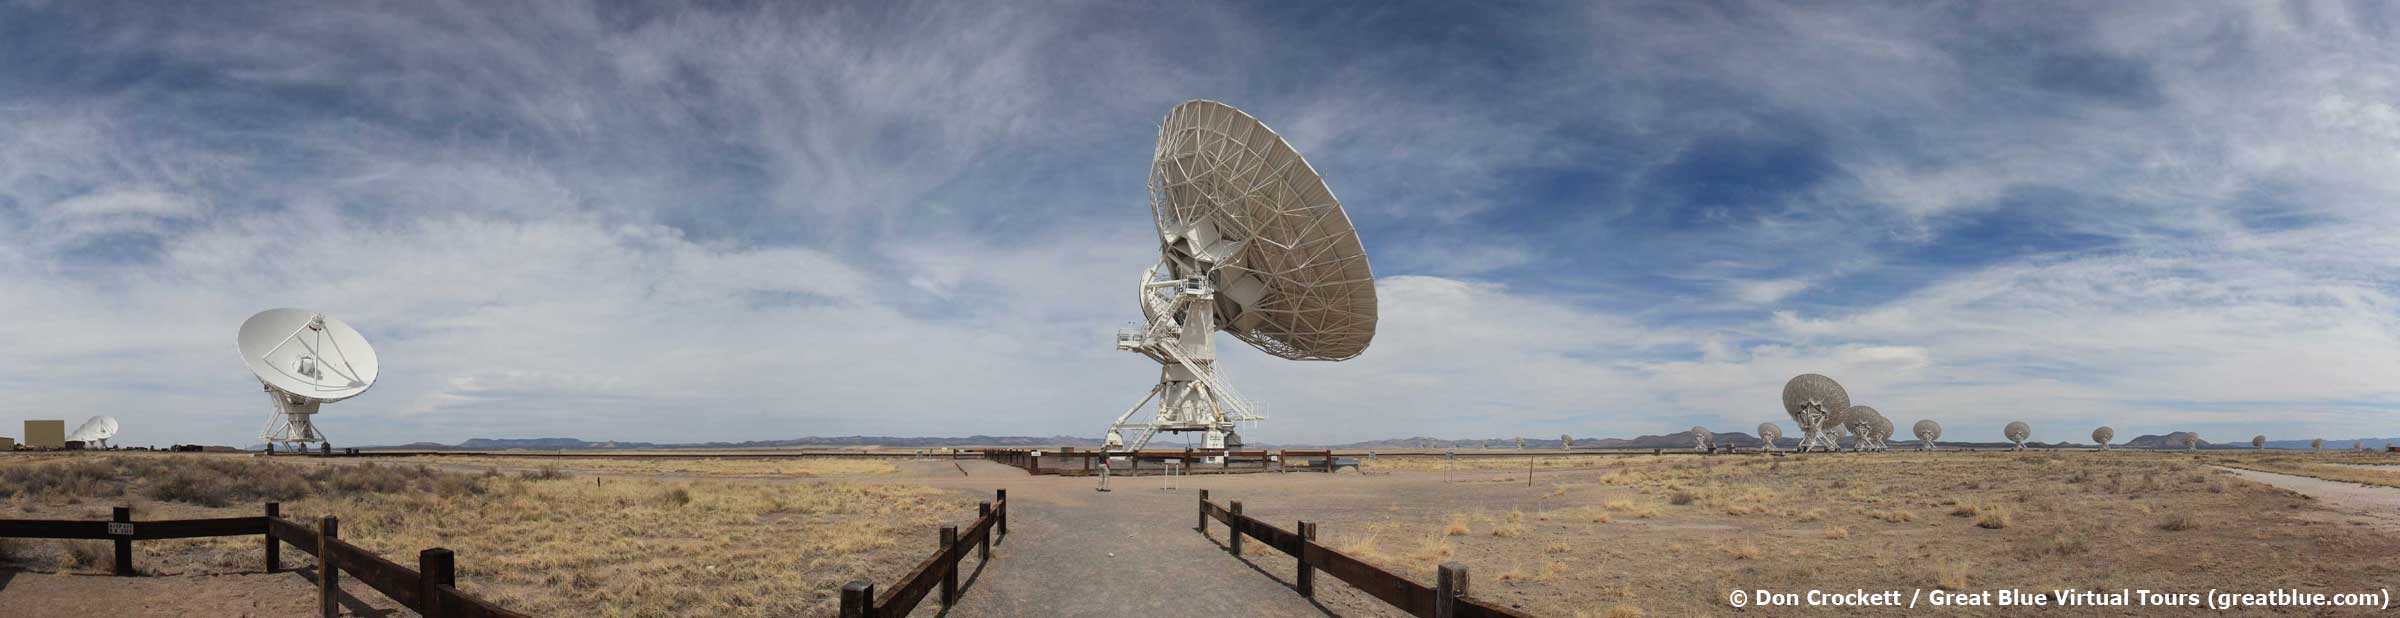 Very Large Array High